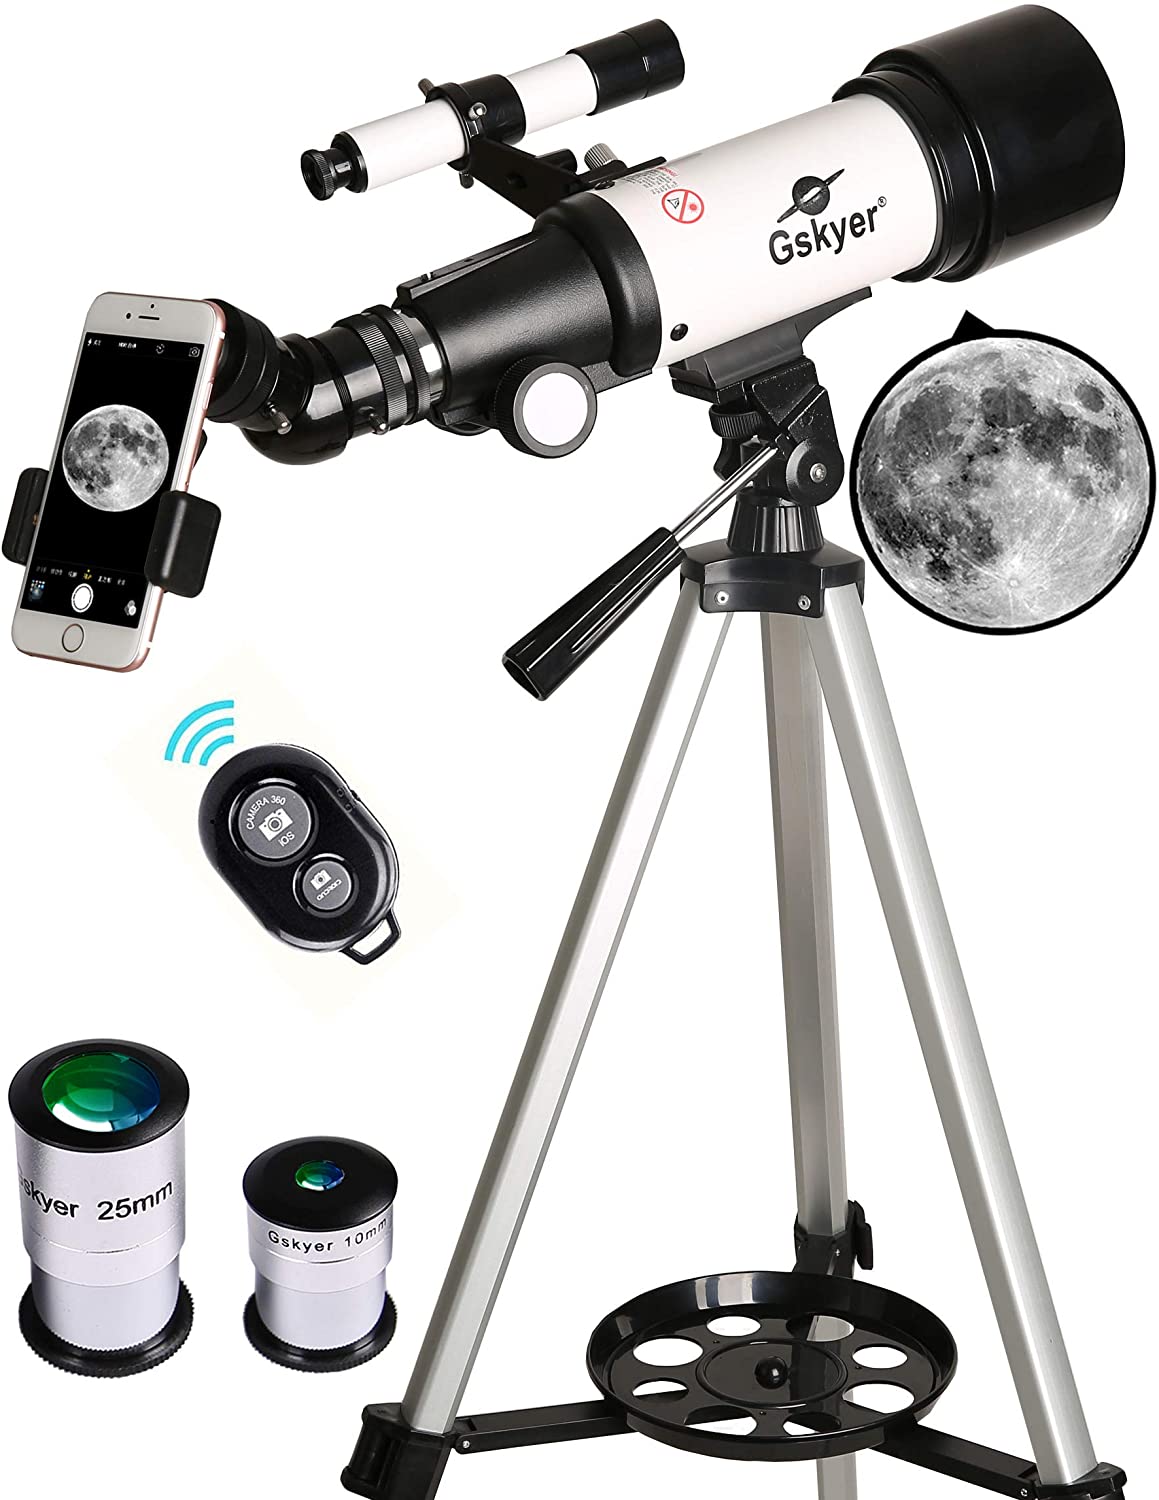 Fanhua Astronomy Telescope for Beginners Kids Adults,70mm Aperture 400mm Wide-Angle Refractor Travel Telescope with Tripod /& Phone Adapter to Observe Moon /& Planet